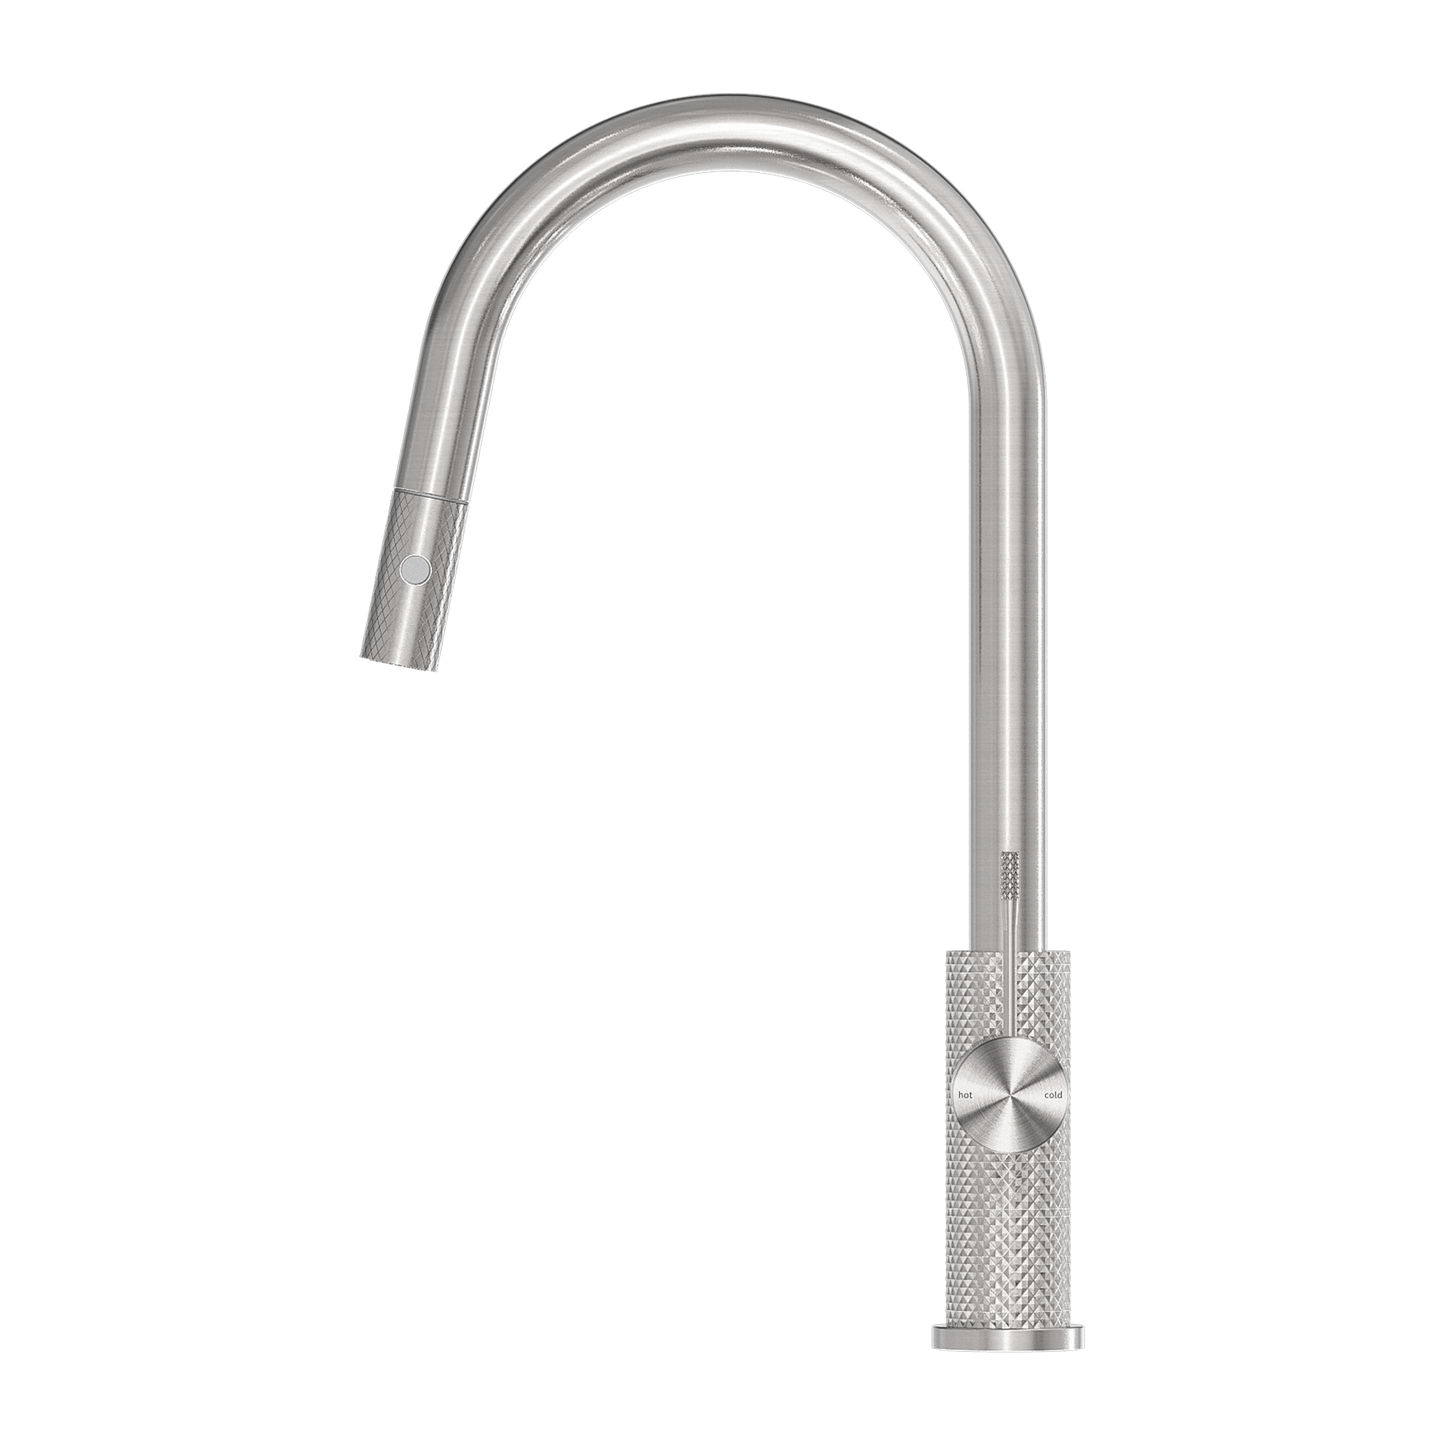 Diamond Knurling Opal Kitchen Mixer with Pull Out Hose - Brushed Nickel with PVD Coating